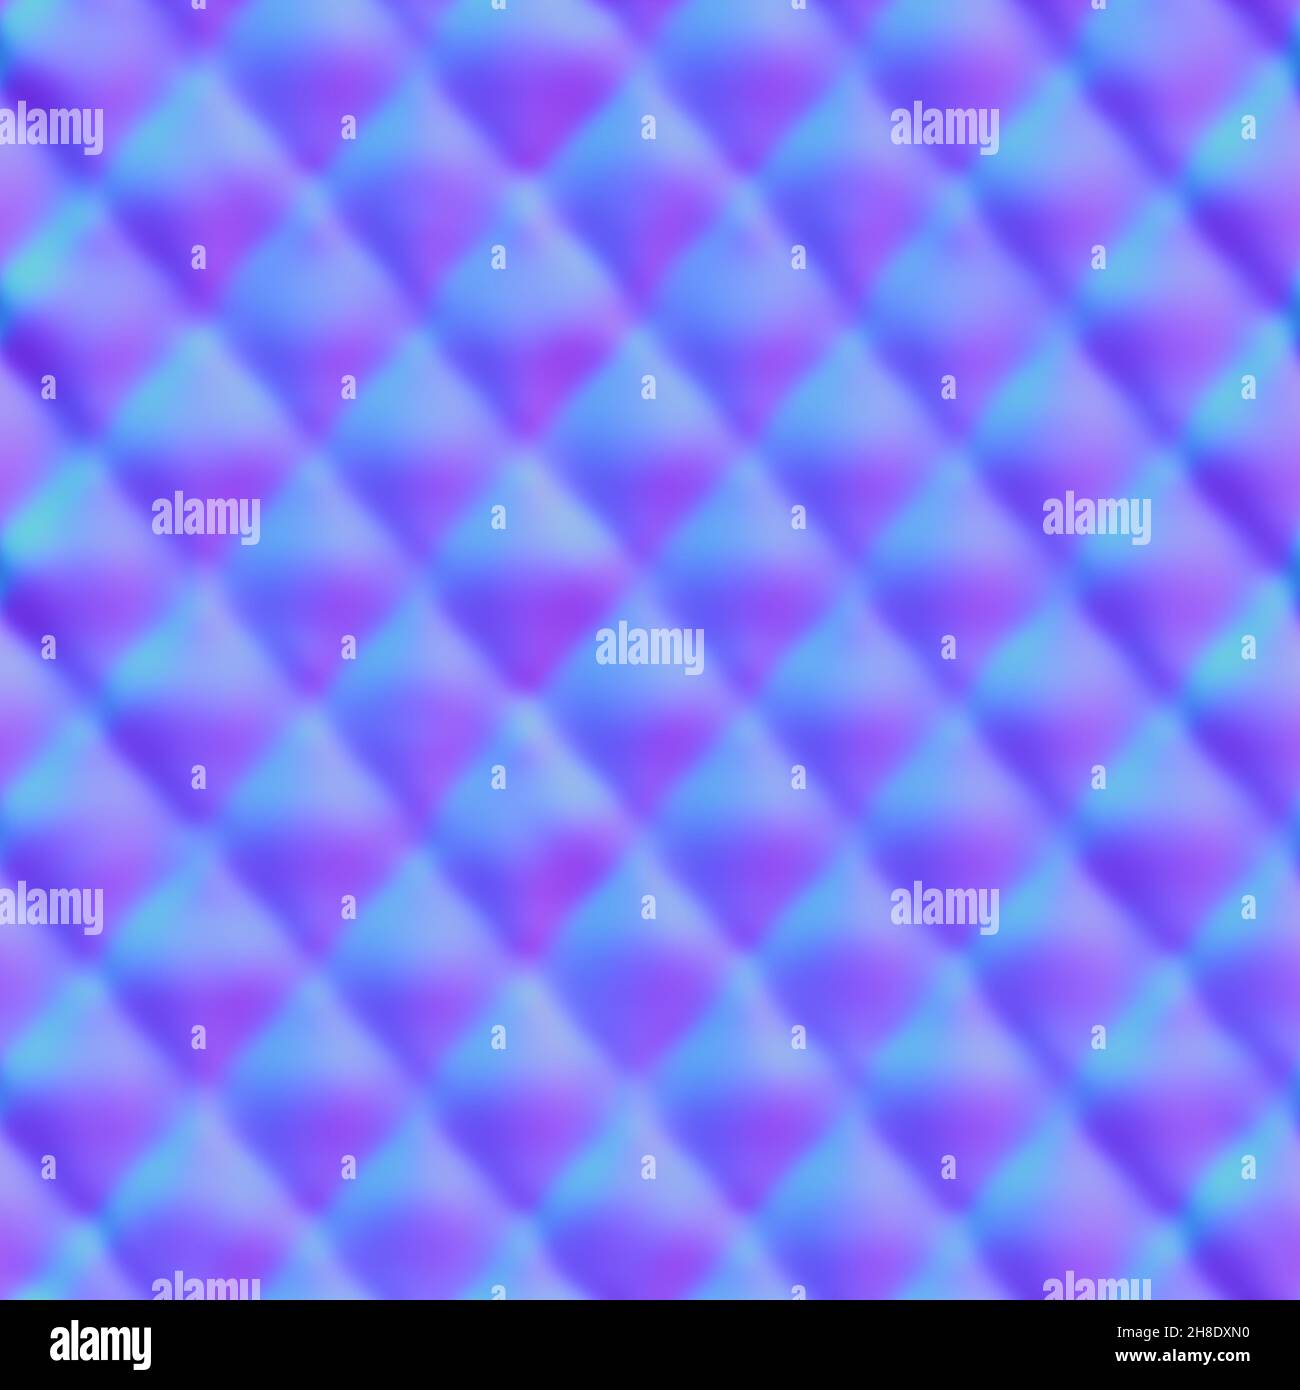 Normal map texture fabric 4k resolution background Stock Photo - Alamy